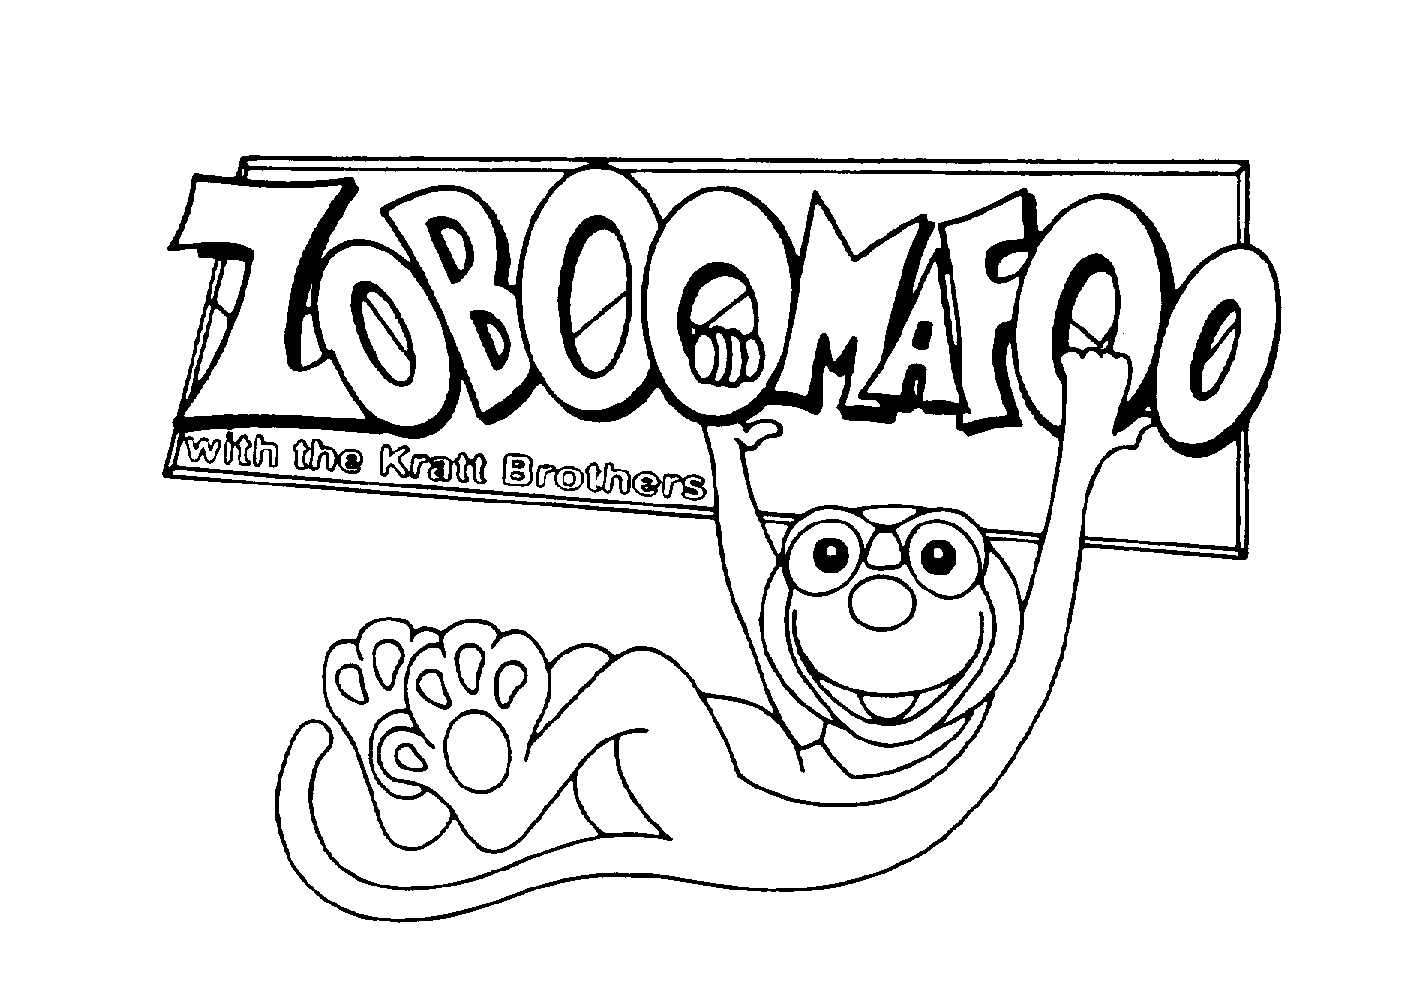  ZOBOOMAFOO WITH THE KRATT BROTHERS